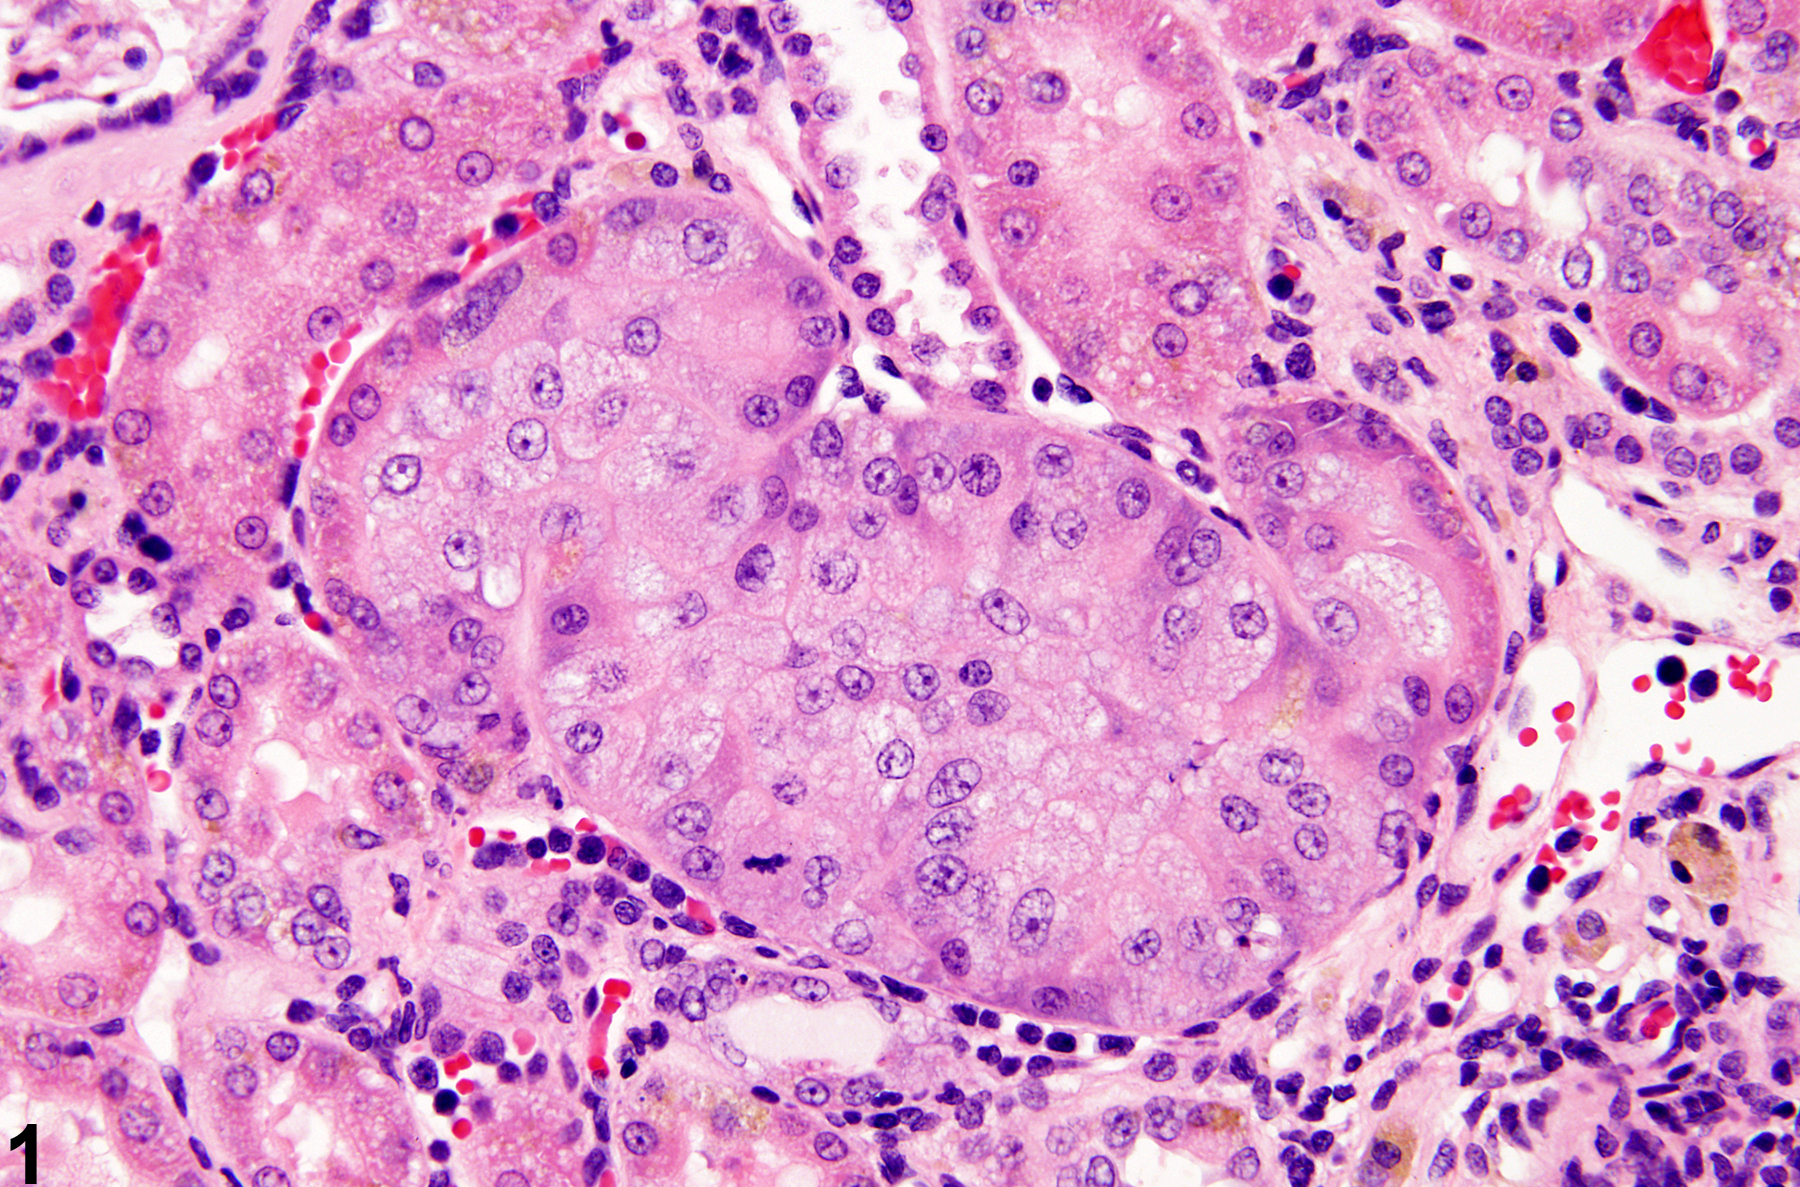 Image of renal tubule epithelium atypical tubule hyperplasia in the kidney from a male F344/N rat in a chronic study